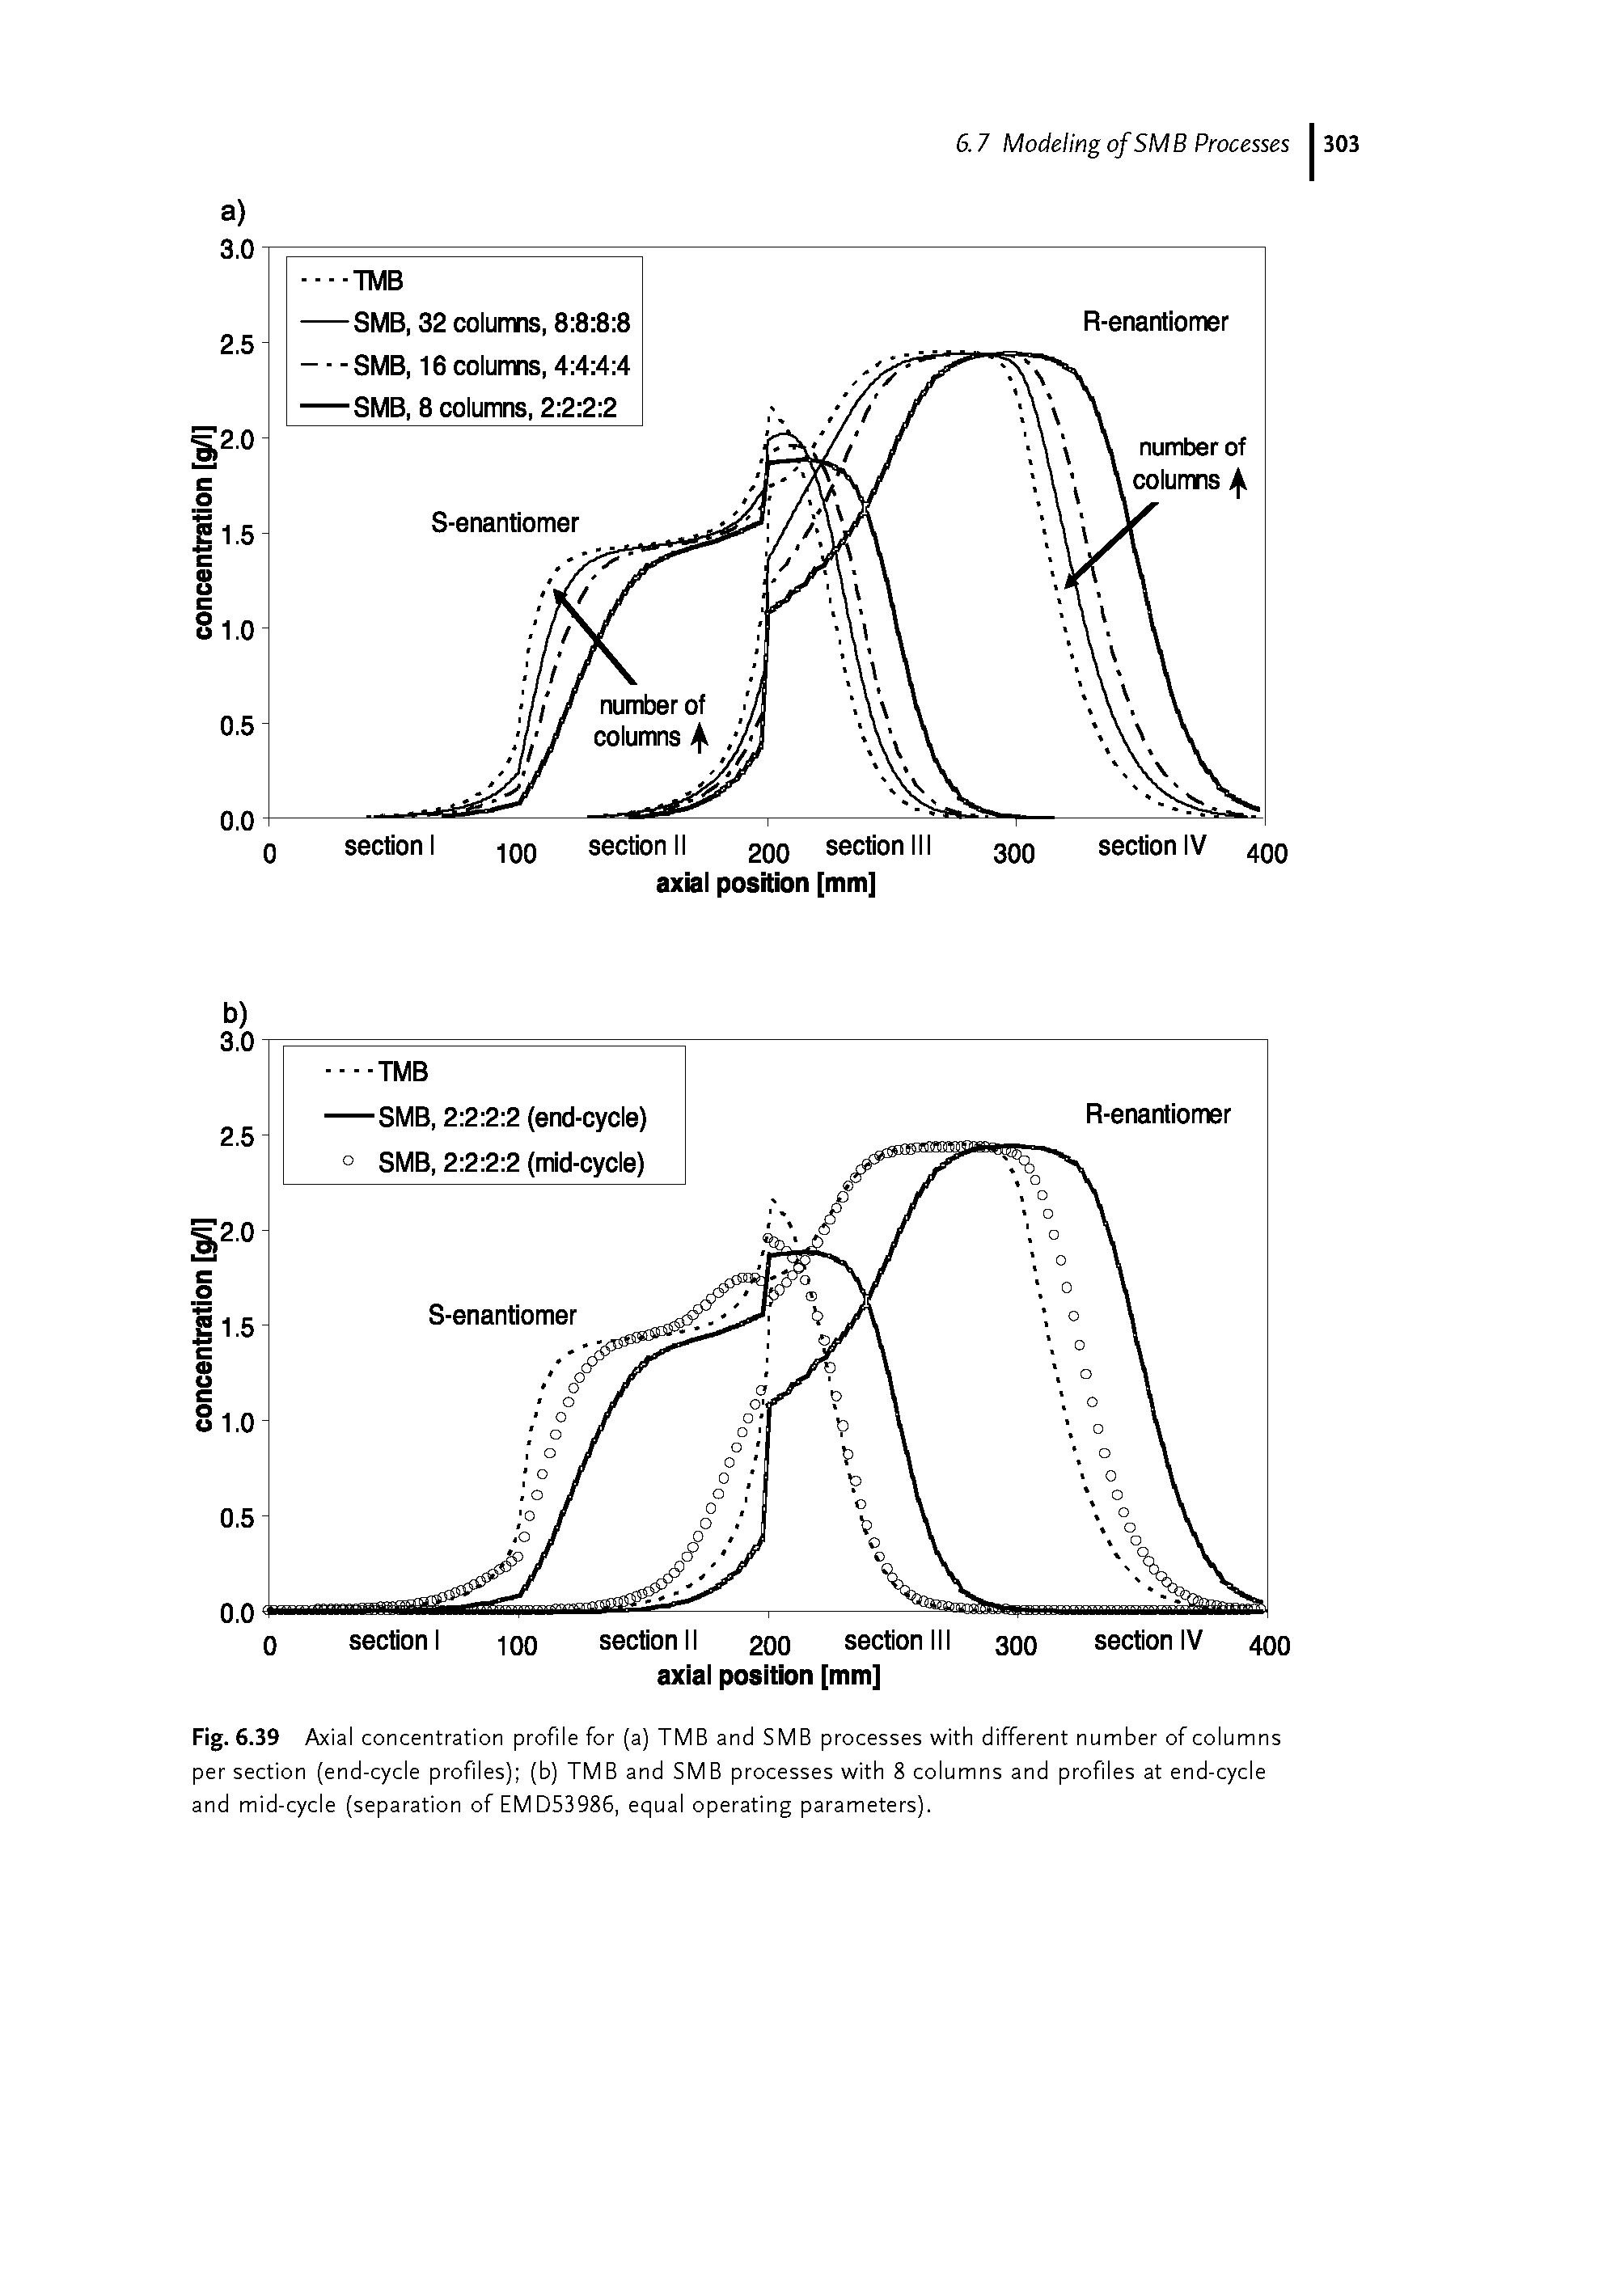 Fig. 6.39 Axial concentration profile for (a) TMB and SMB processes with different number of columns per section (end-cycle profiles) (b) TMB and SMB processes with 8 columns and profiles at end-cycle and mid-cycle (separation of EMD53986, equal operating parameters).